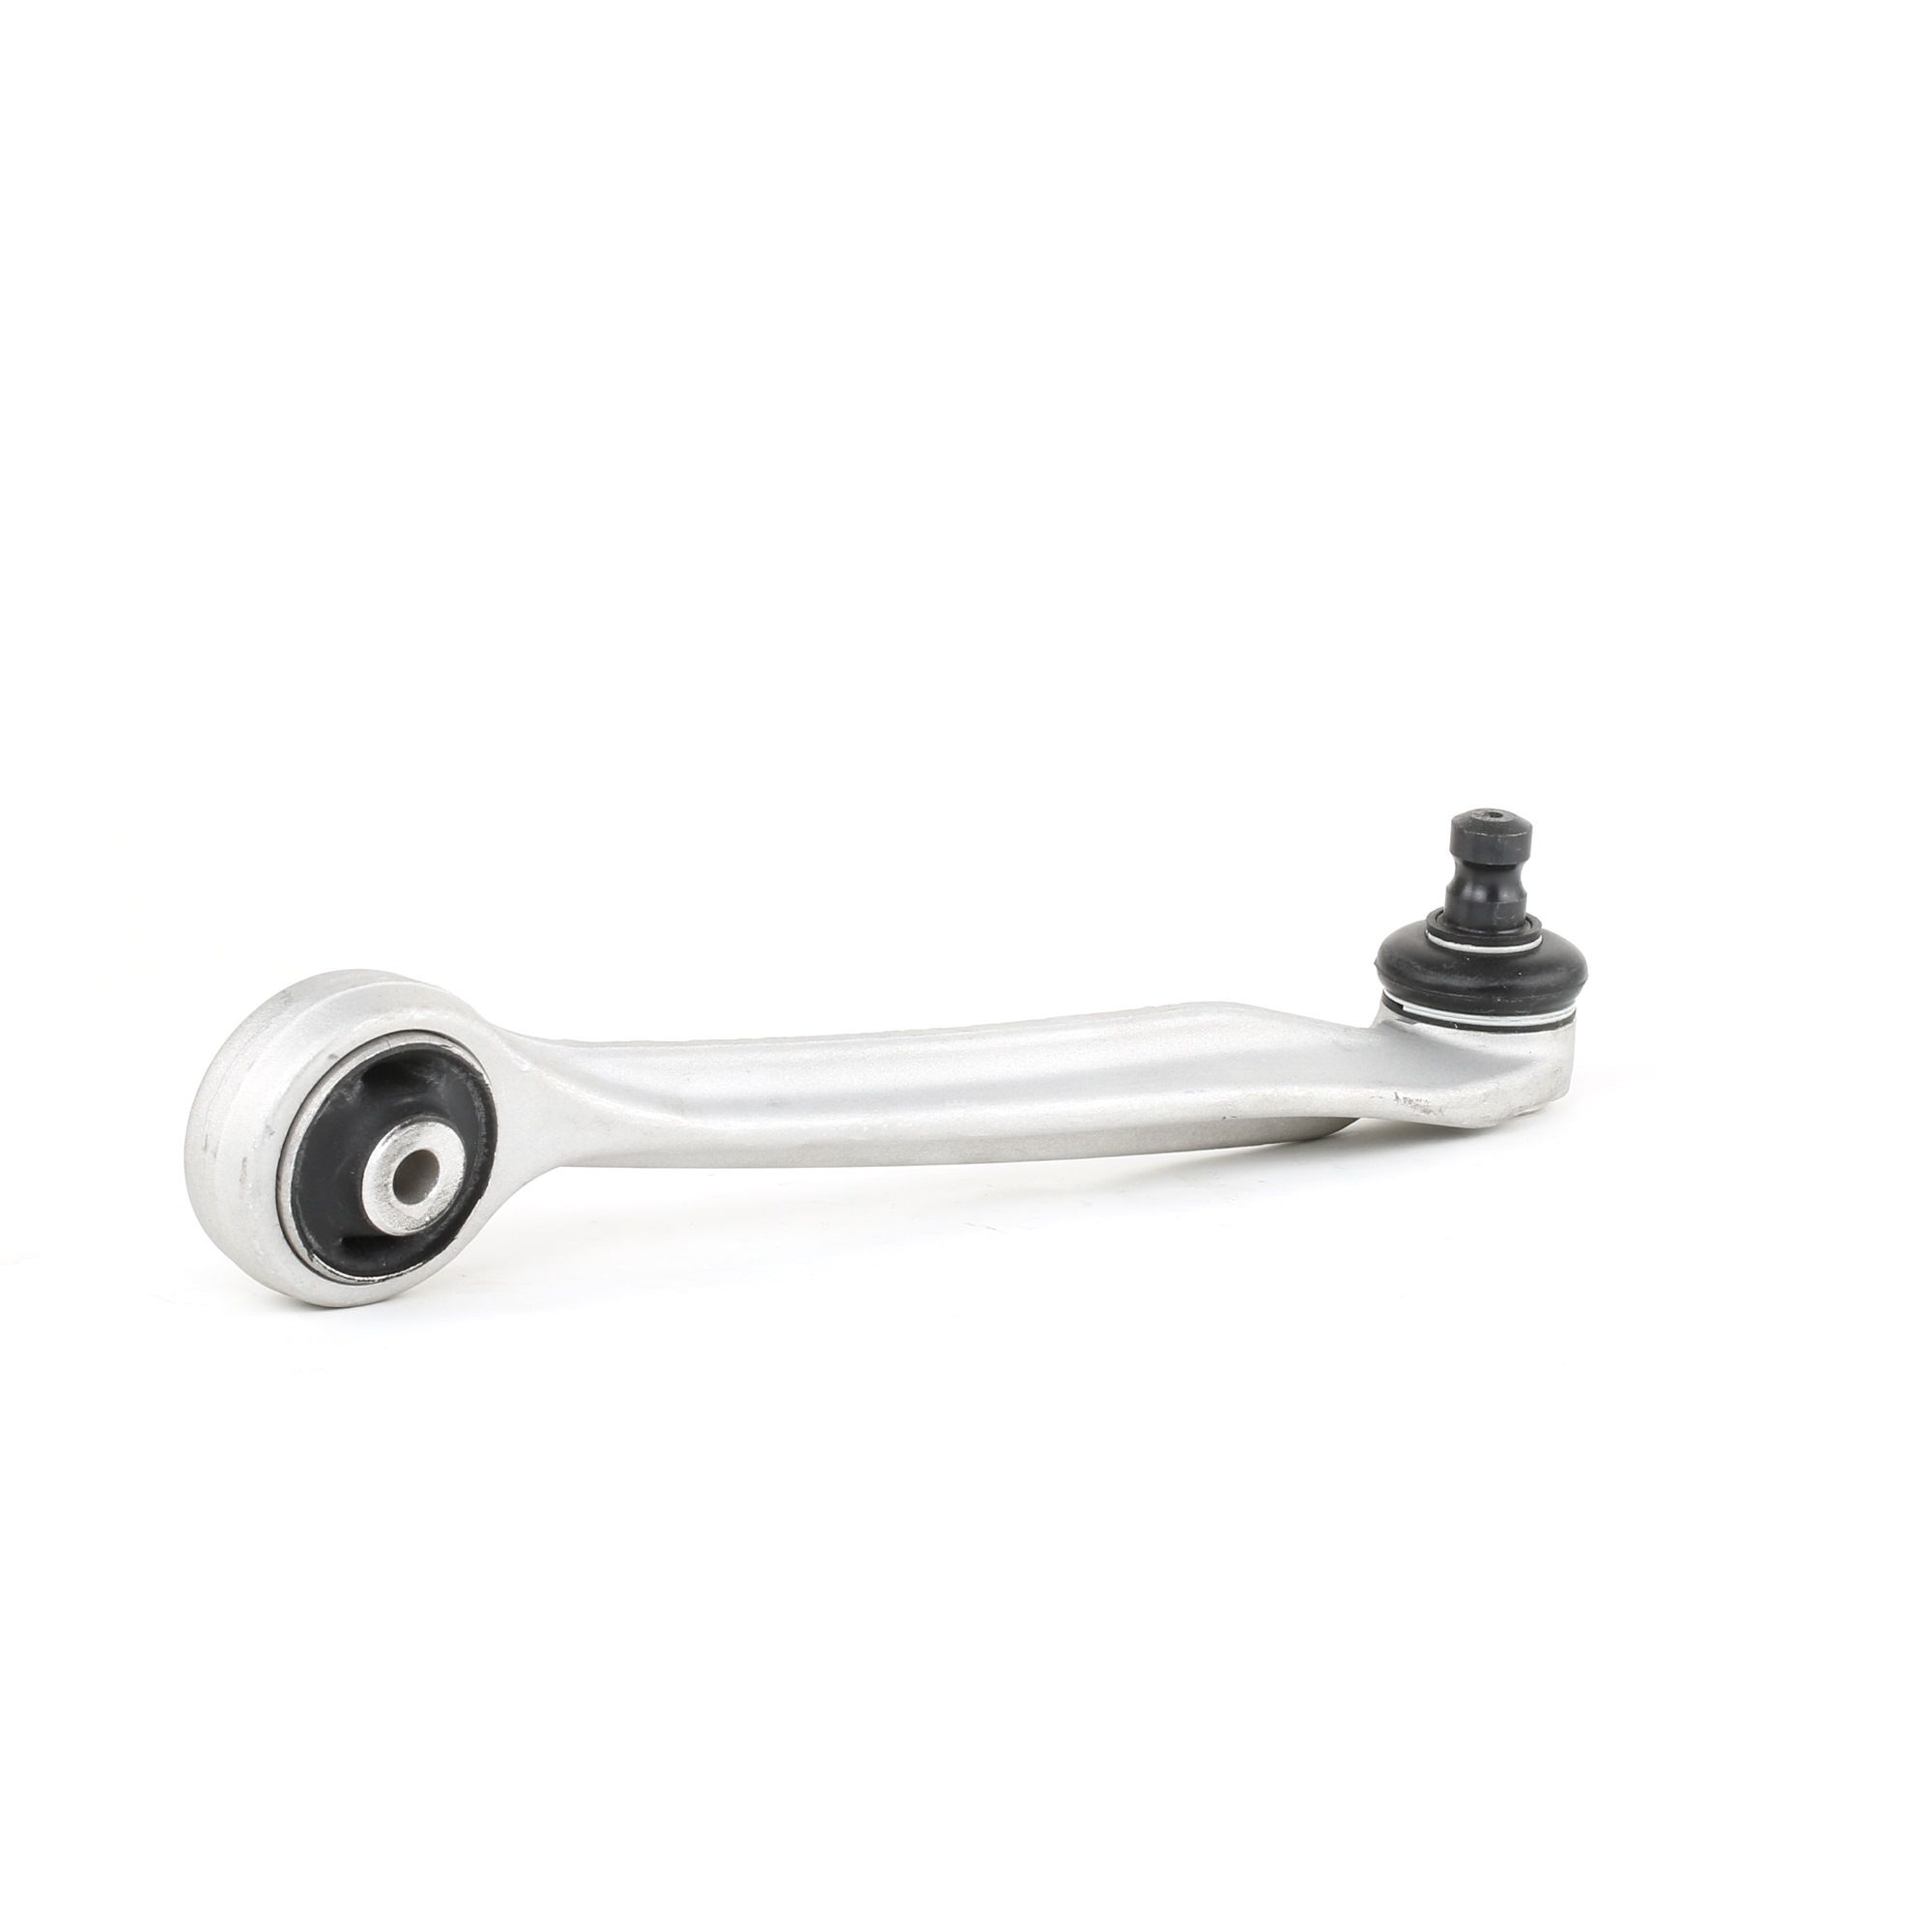 A.B.S. 210045 Suspension arm with ball joint, with rubber mount, Trailing Arm, Aluminium, Cone Size: 16 mm